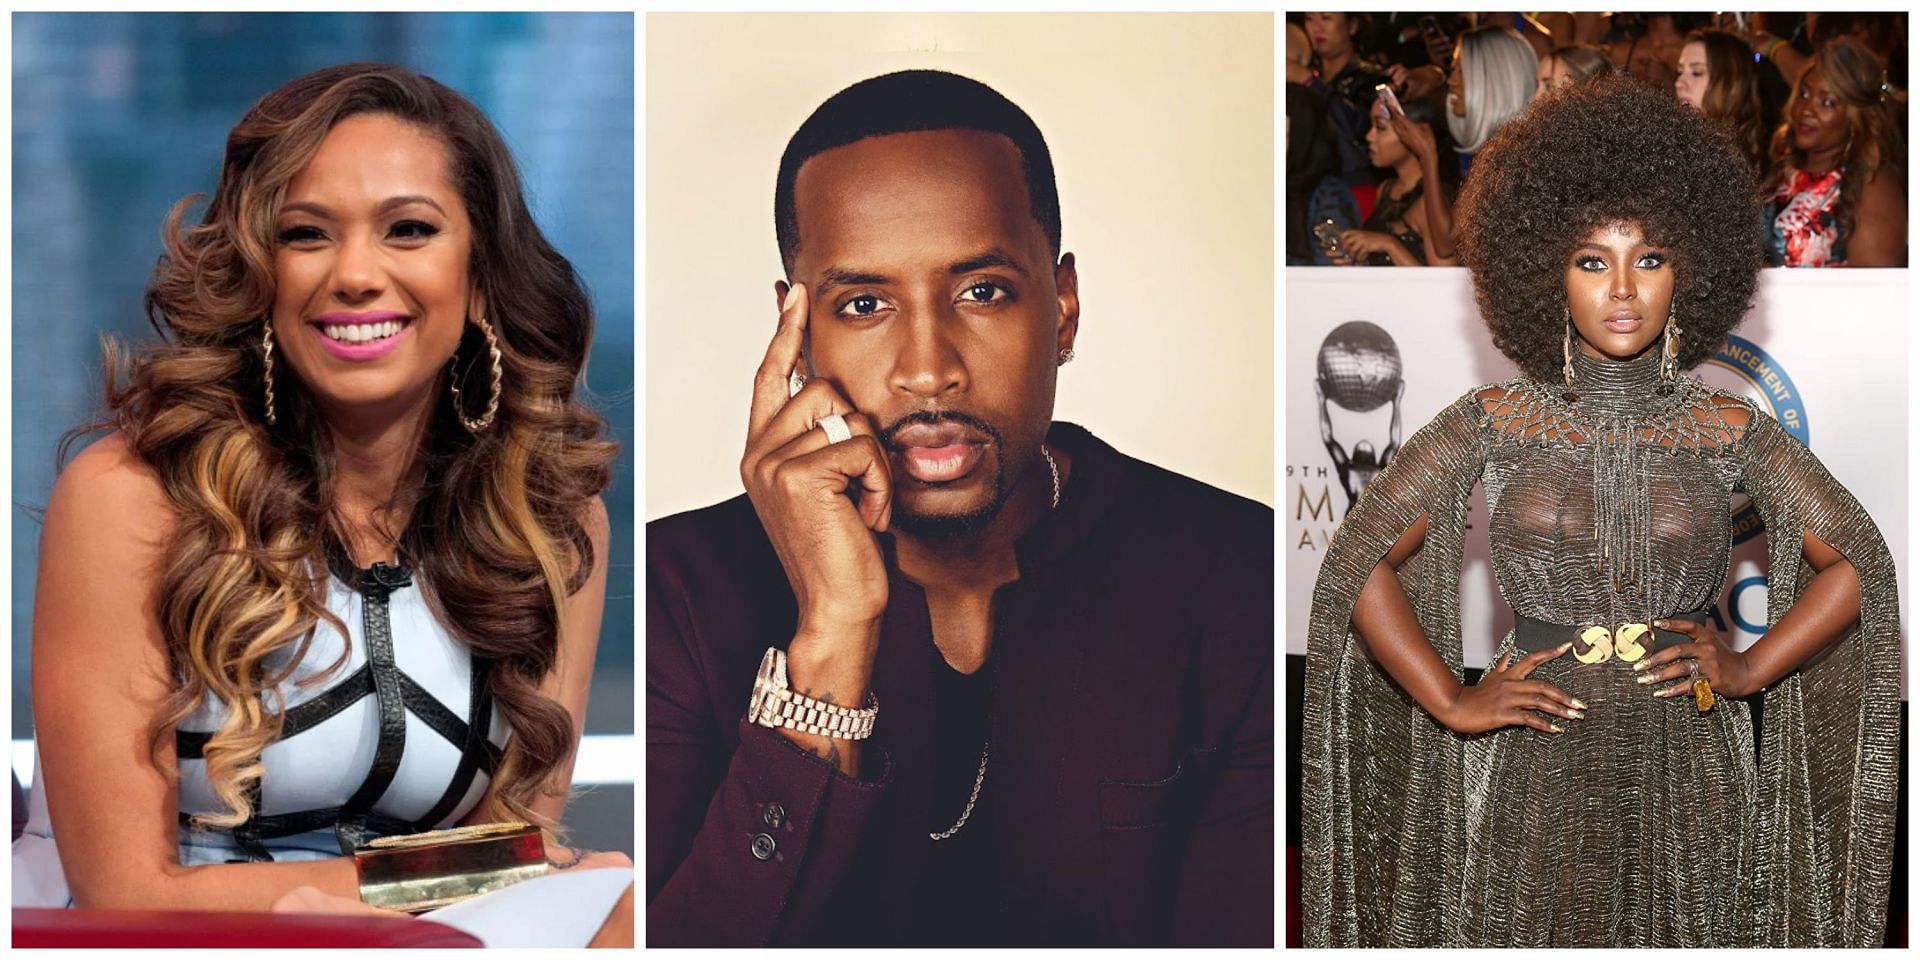 Erica slammed her ex, Safaree, after he gifted luxury watches to Amara